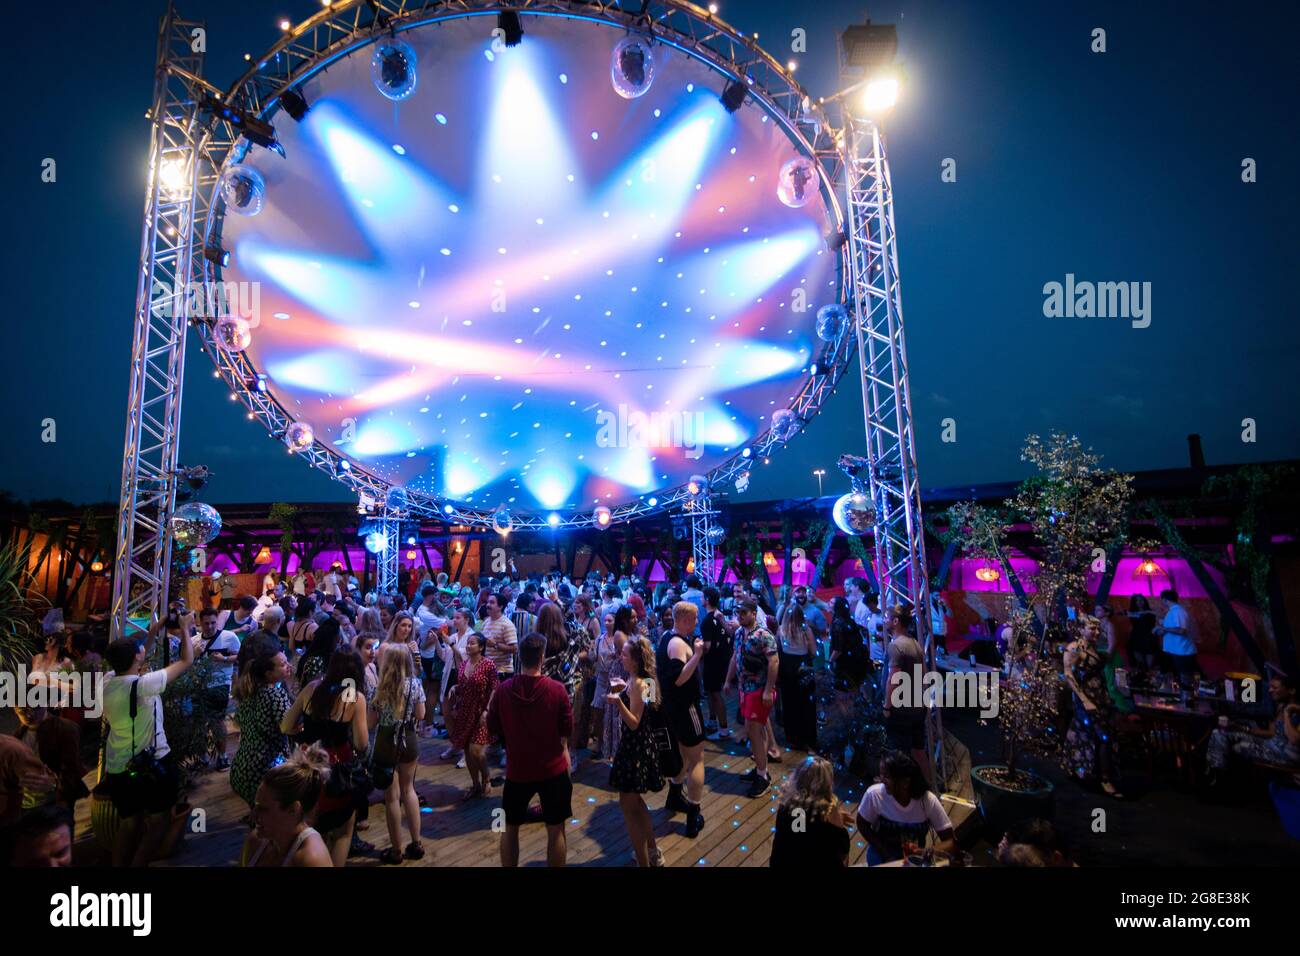 Manchester, UK. 19th July, 2021. People return to the dance floor on freedom day. At one minute past midnight today, people in England could return to the dance floor for the first time in over 16 months since COVID19 lockdown restrictions were implemented. Credit: Andy Barton/Alamy Live News Stock Photo